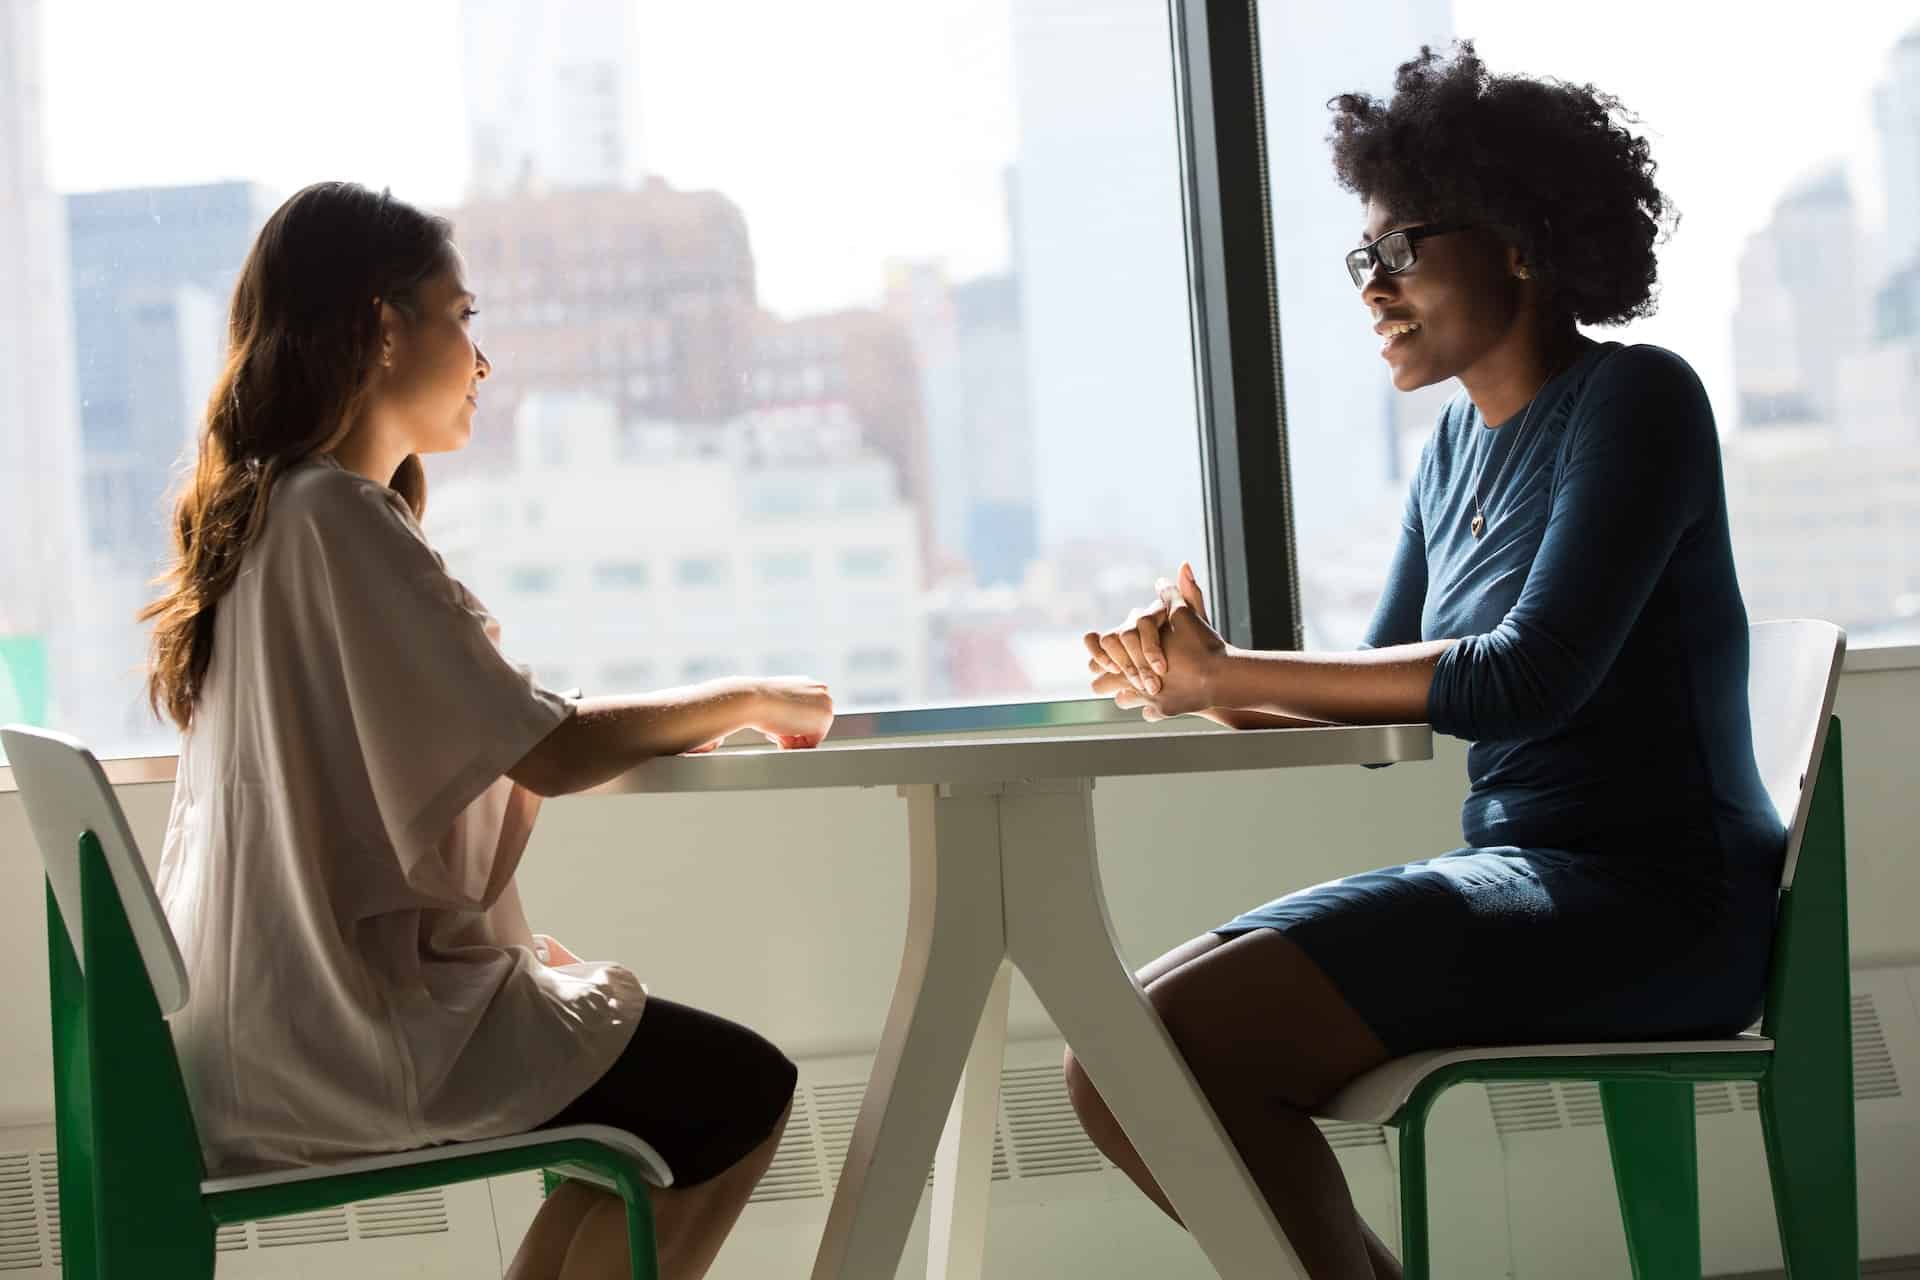 Two women talking at a table in the office